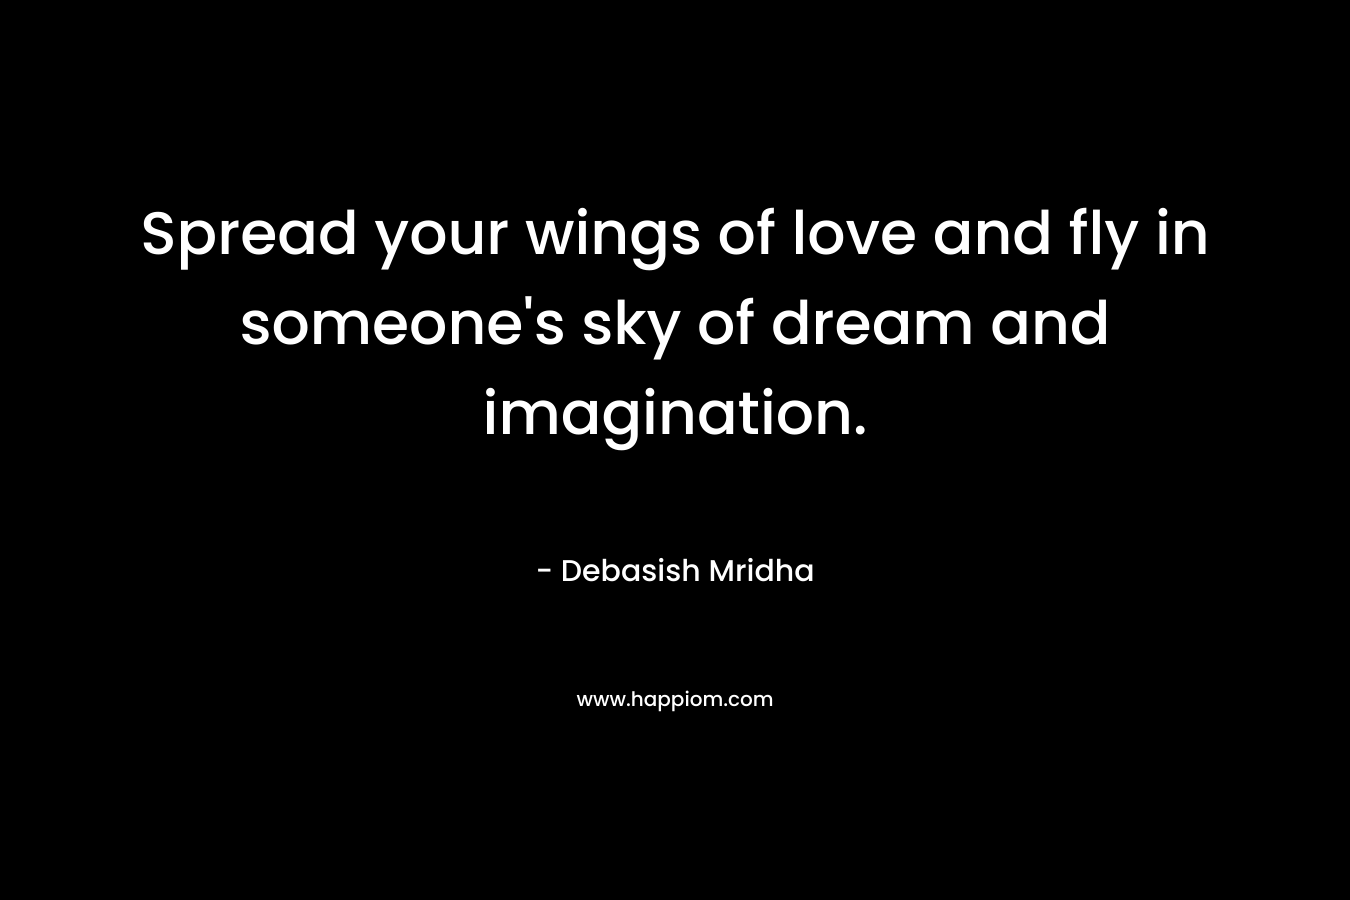 Spread your wings of love and fly in someone's sky of dream and imagination.